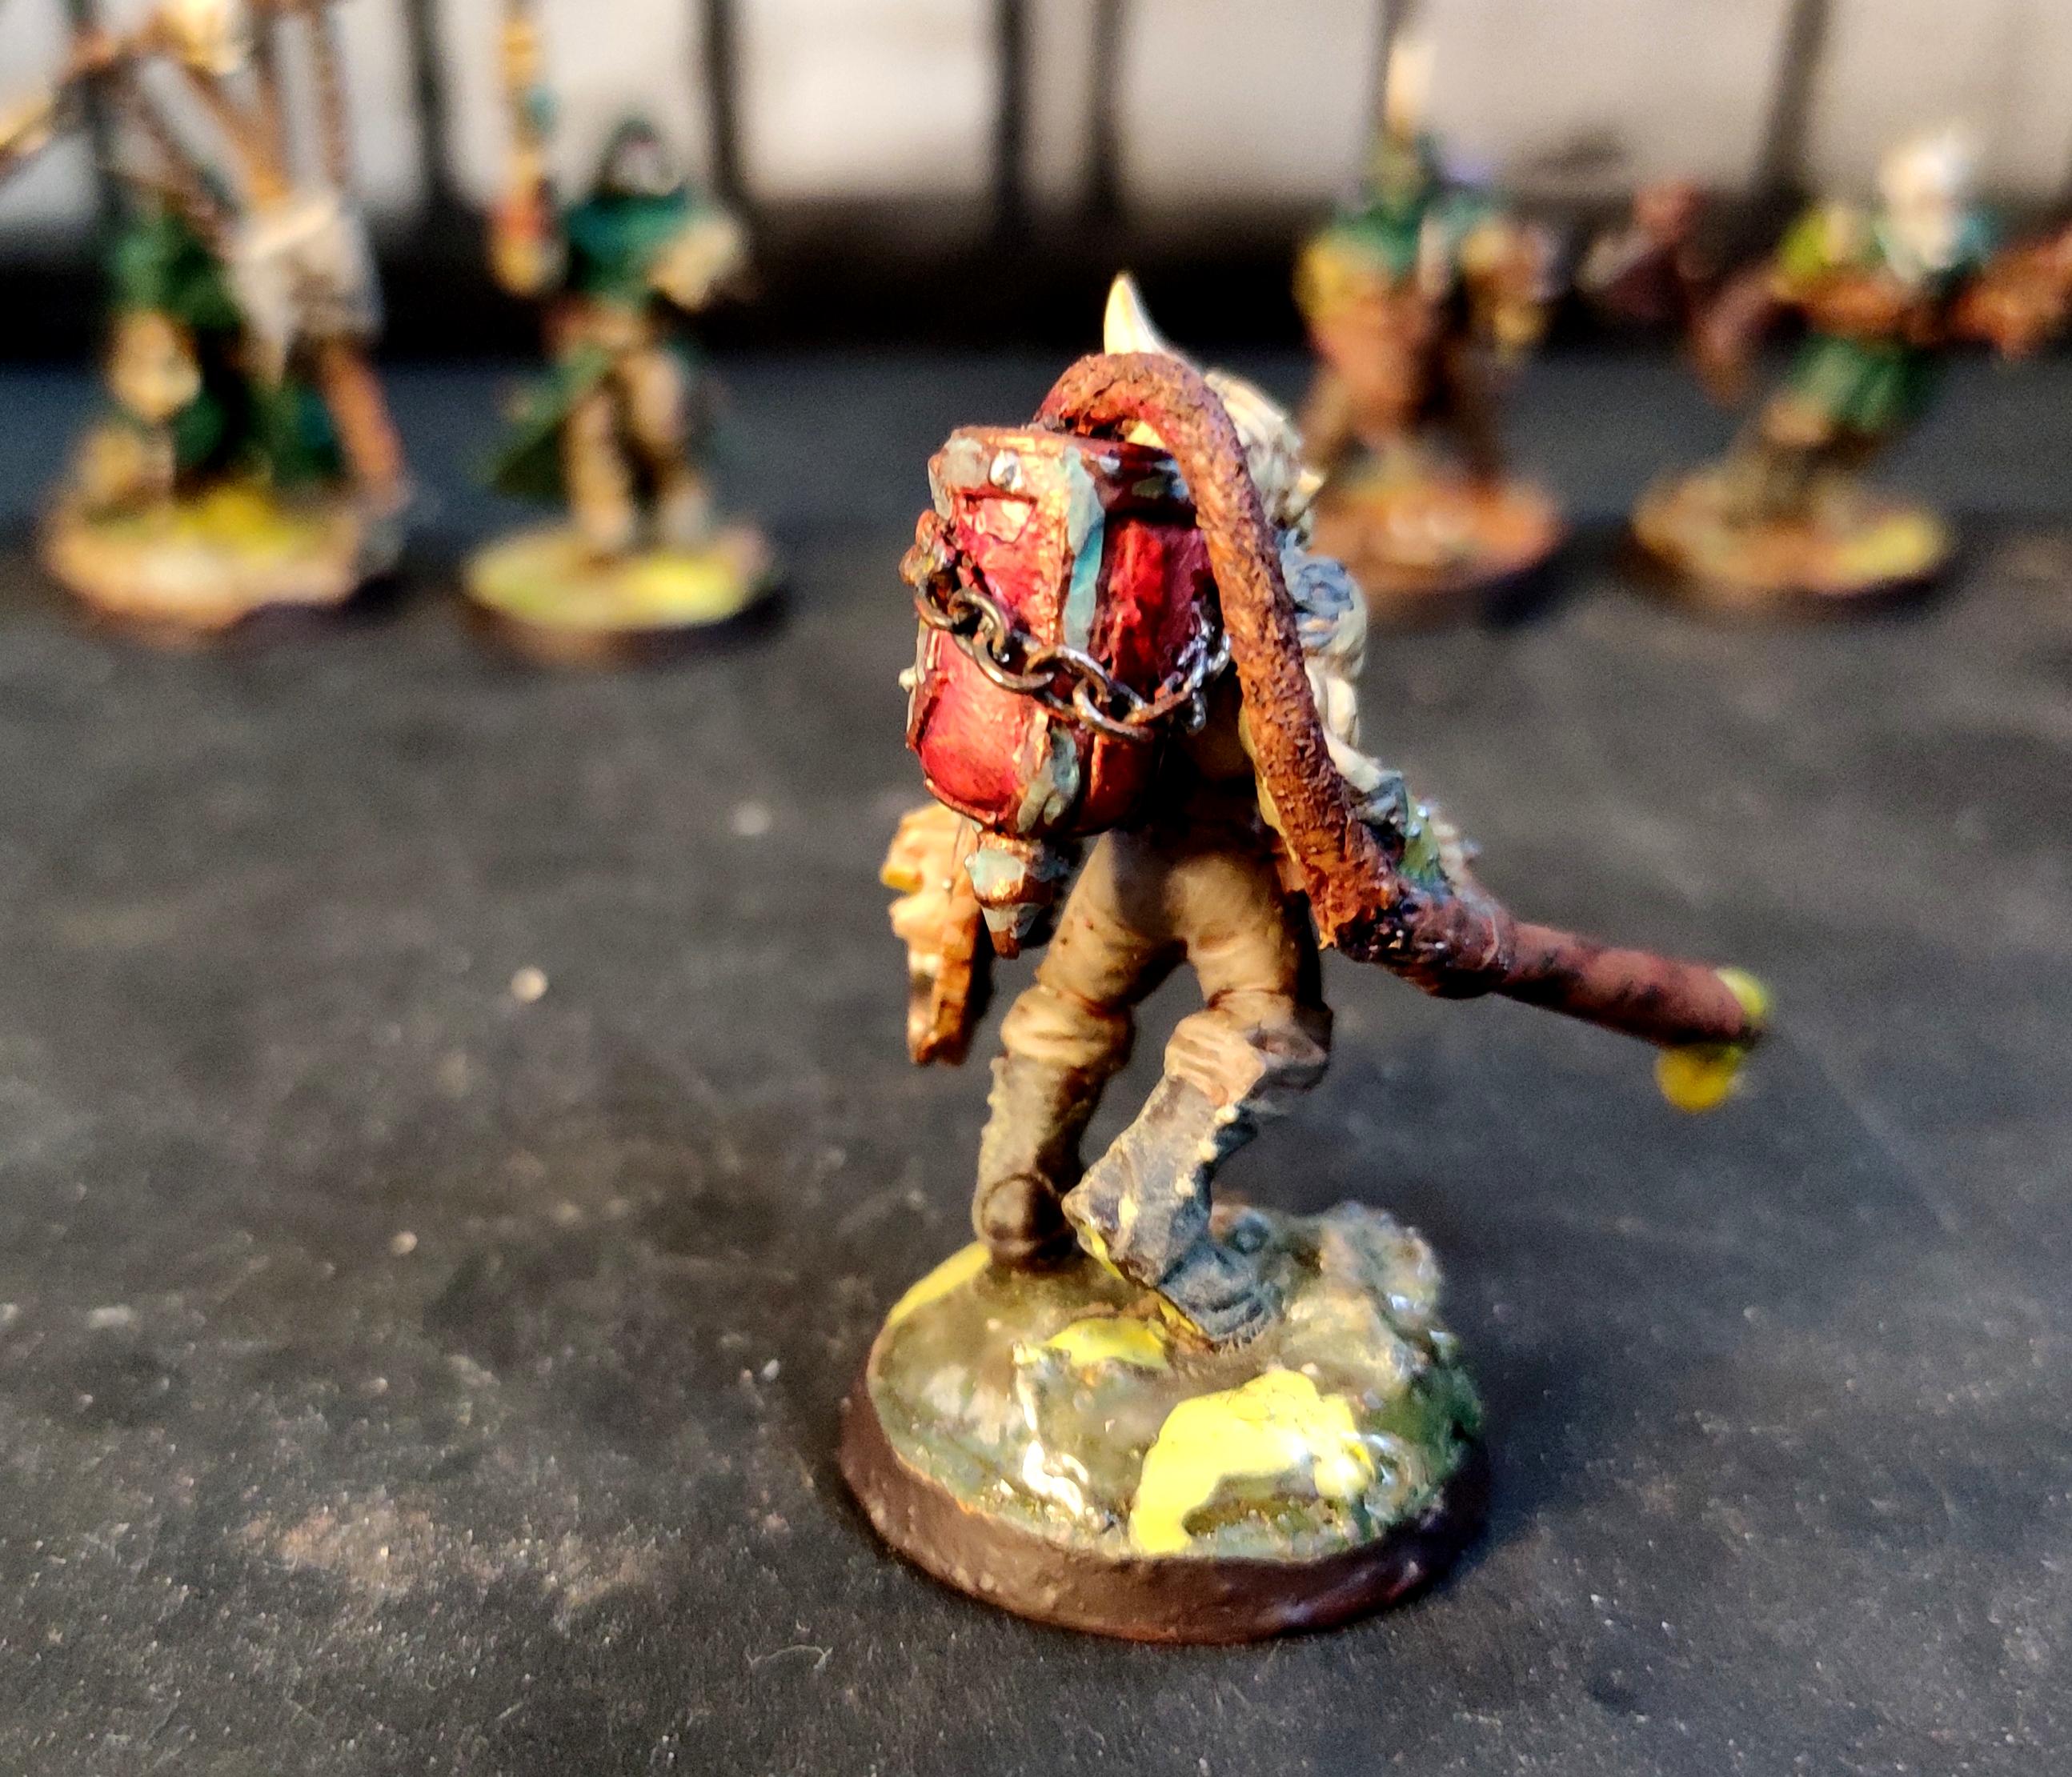 Blight, Chaos, Chaos Cultists, Conversion, Cult, Cultists, Dark Vengeance, Decay, Disease, Heresy, Heretics, Infantry, Kitbash, Lost And The Damned, Mutant, Nurgle, Pestilence, Plague, Plague Spewer, Regiment, Renegade, Rot, Warhammer 40,000